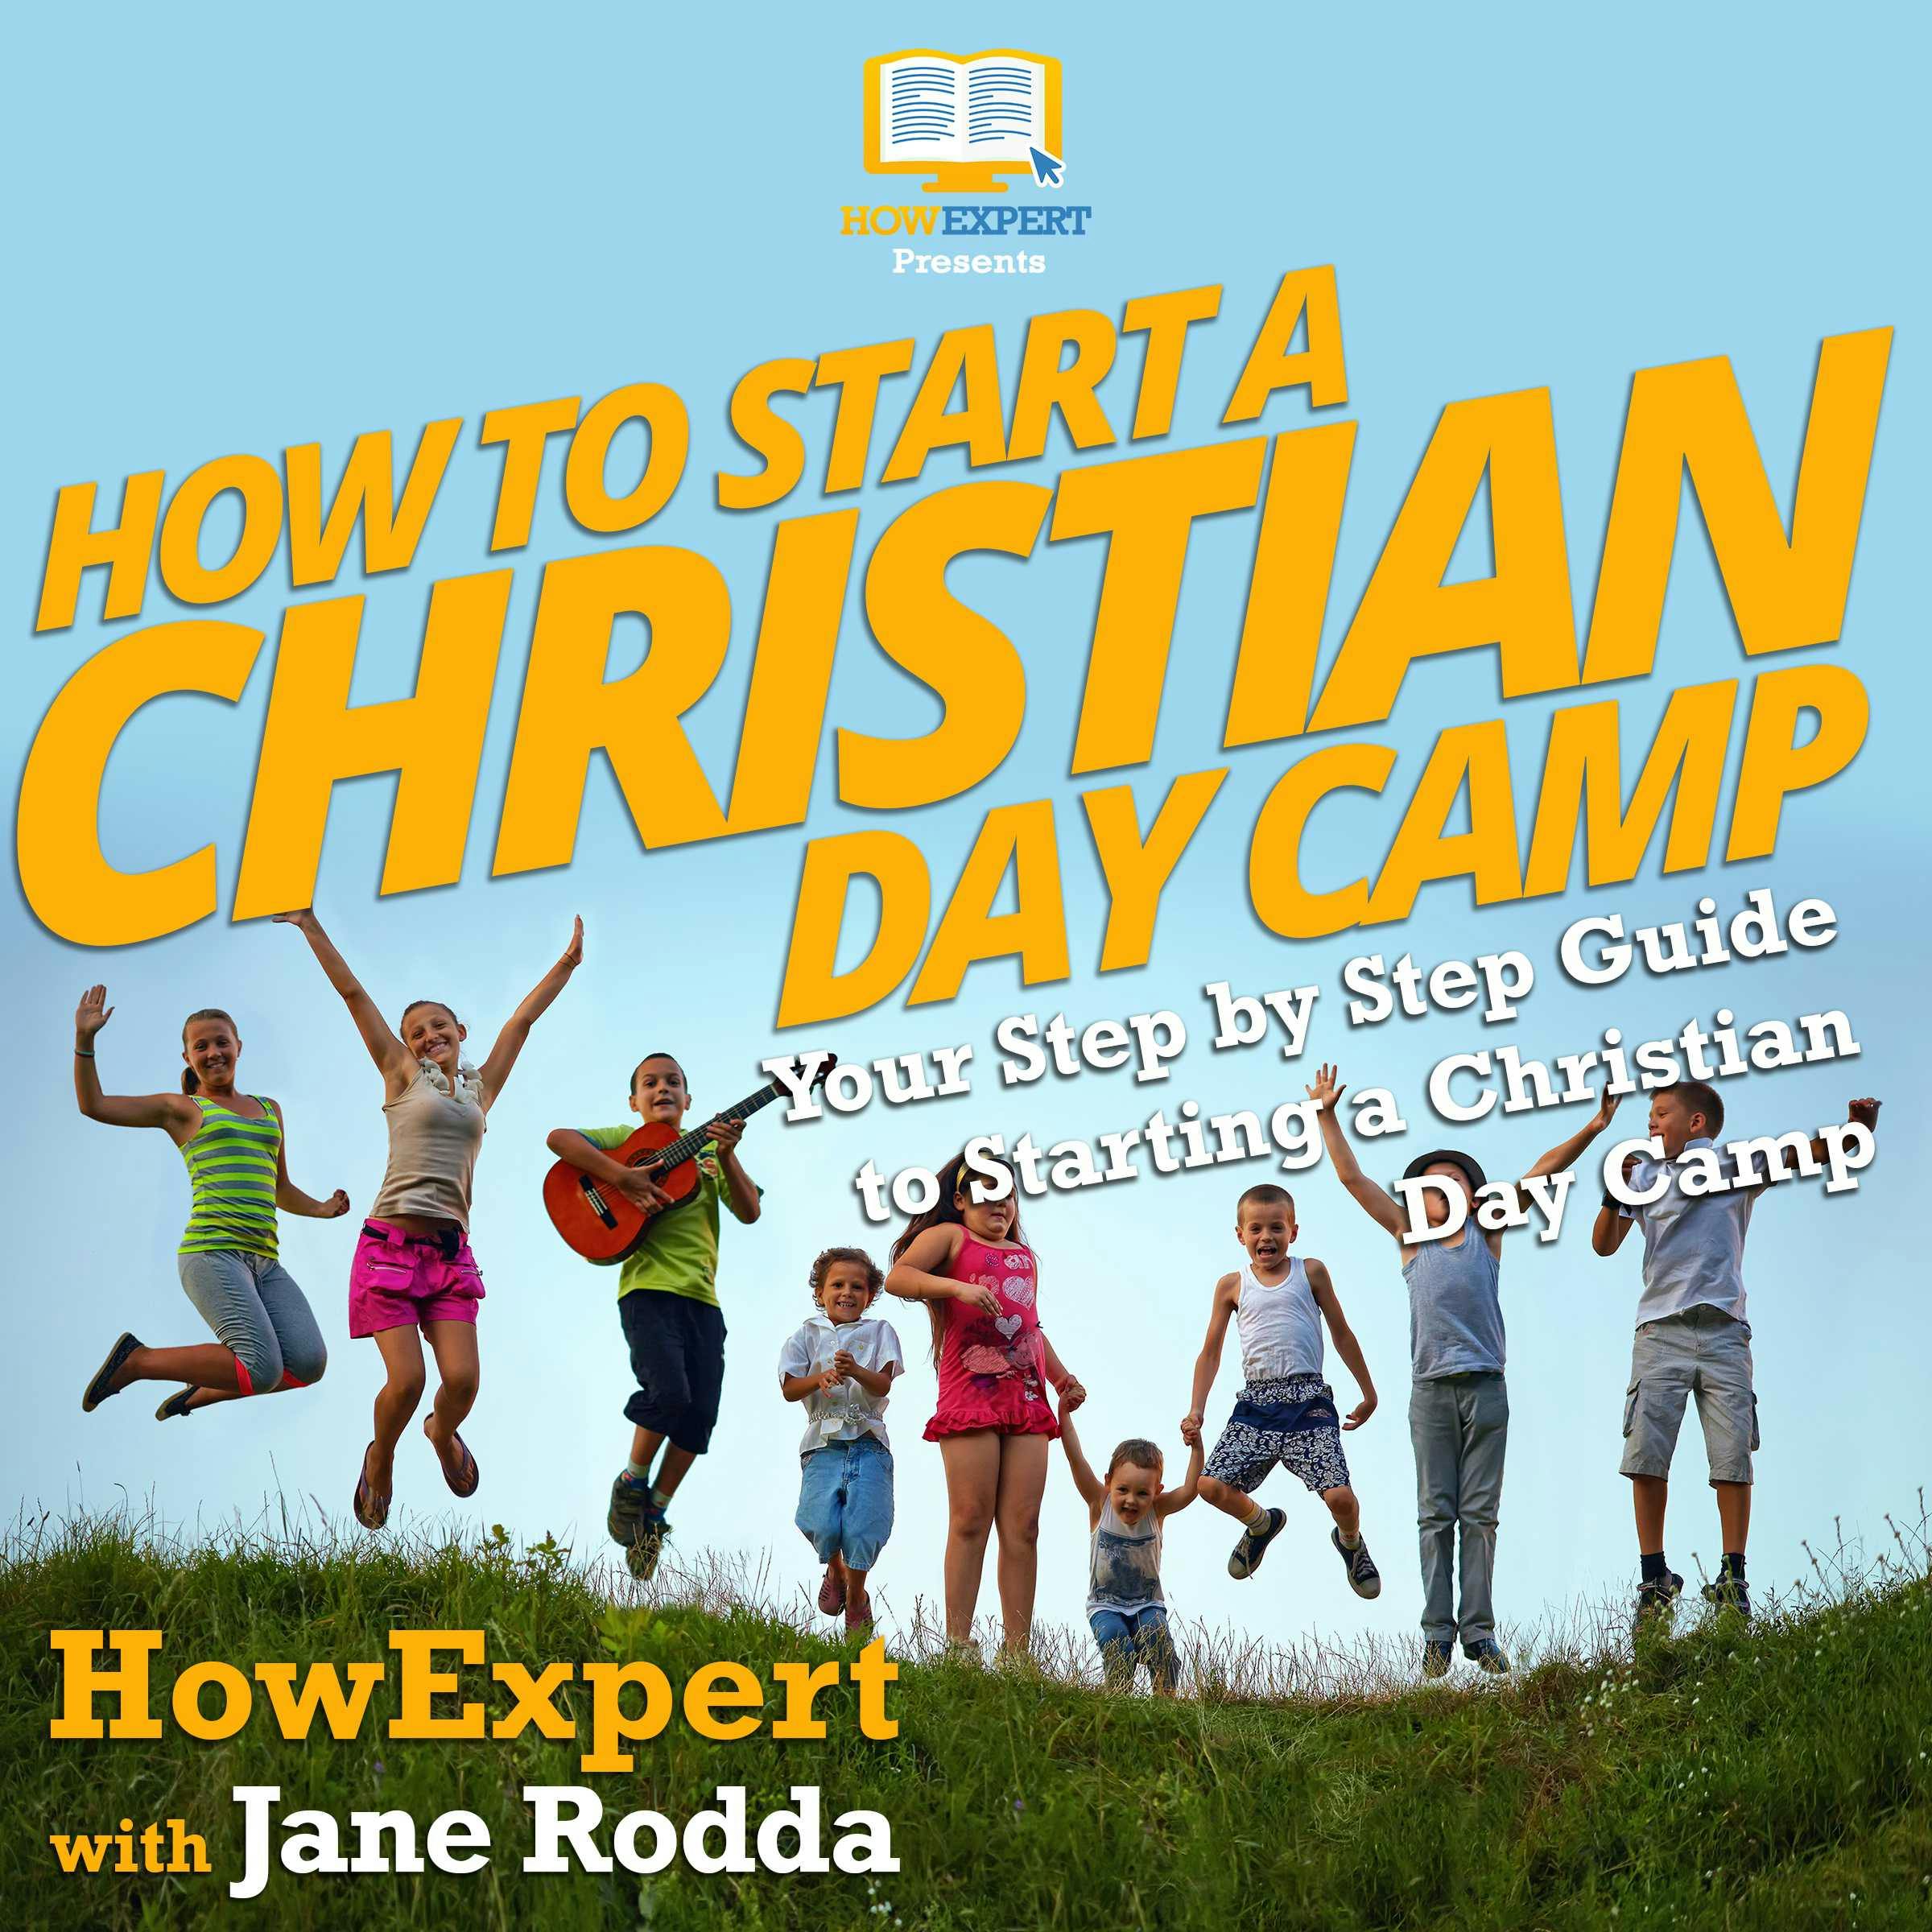 How To Start a Christian Day Camp: Your Step By Step Guide To Starting a Christian Day Camp - undefined